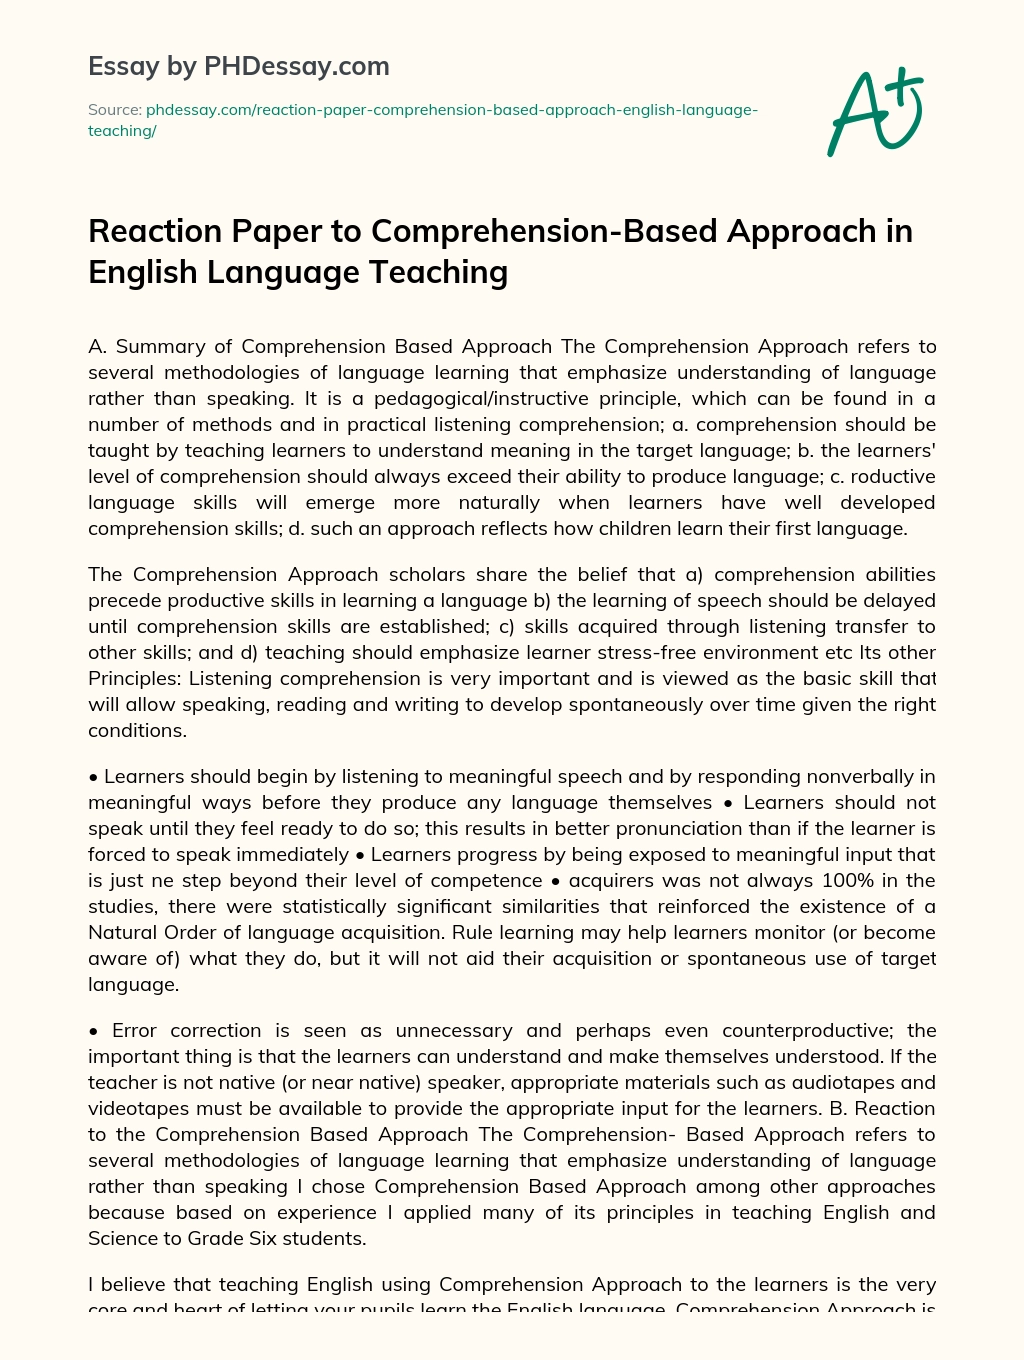 Reaction Paper to Comprehension-Based Approach in English Language Teaching essay